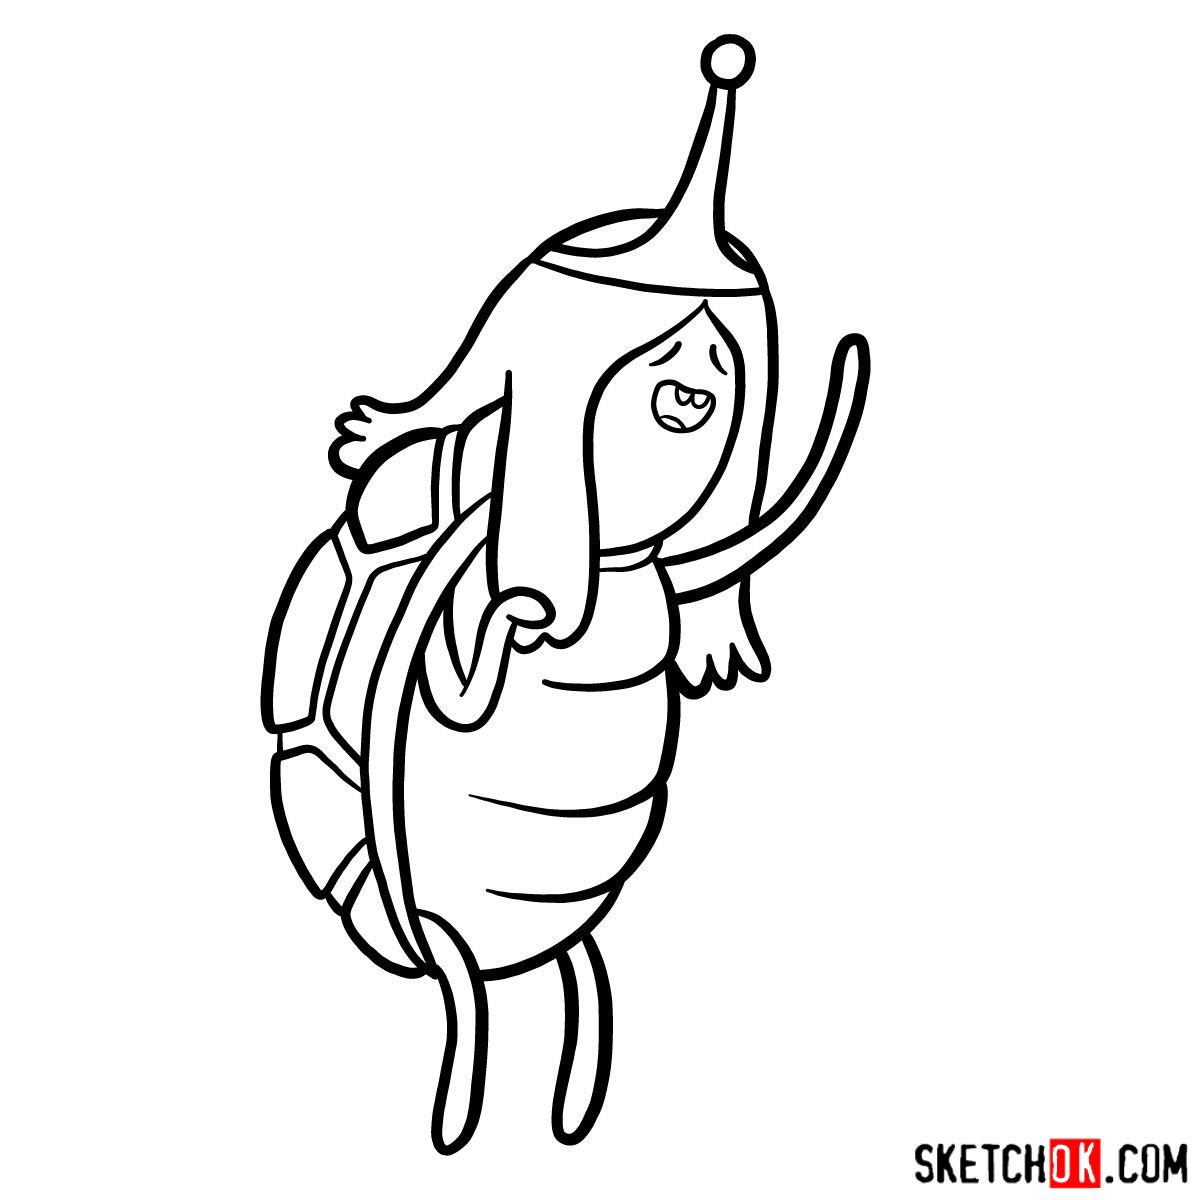 How to draw Turtle Princess from Adventure Time - step 09.